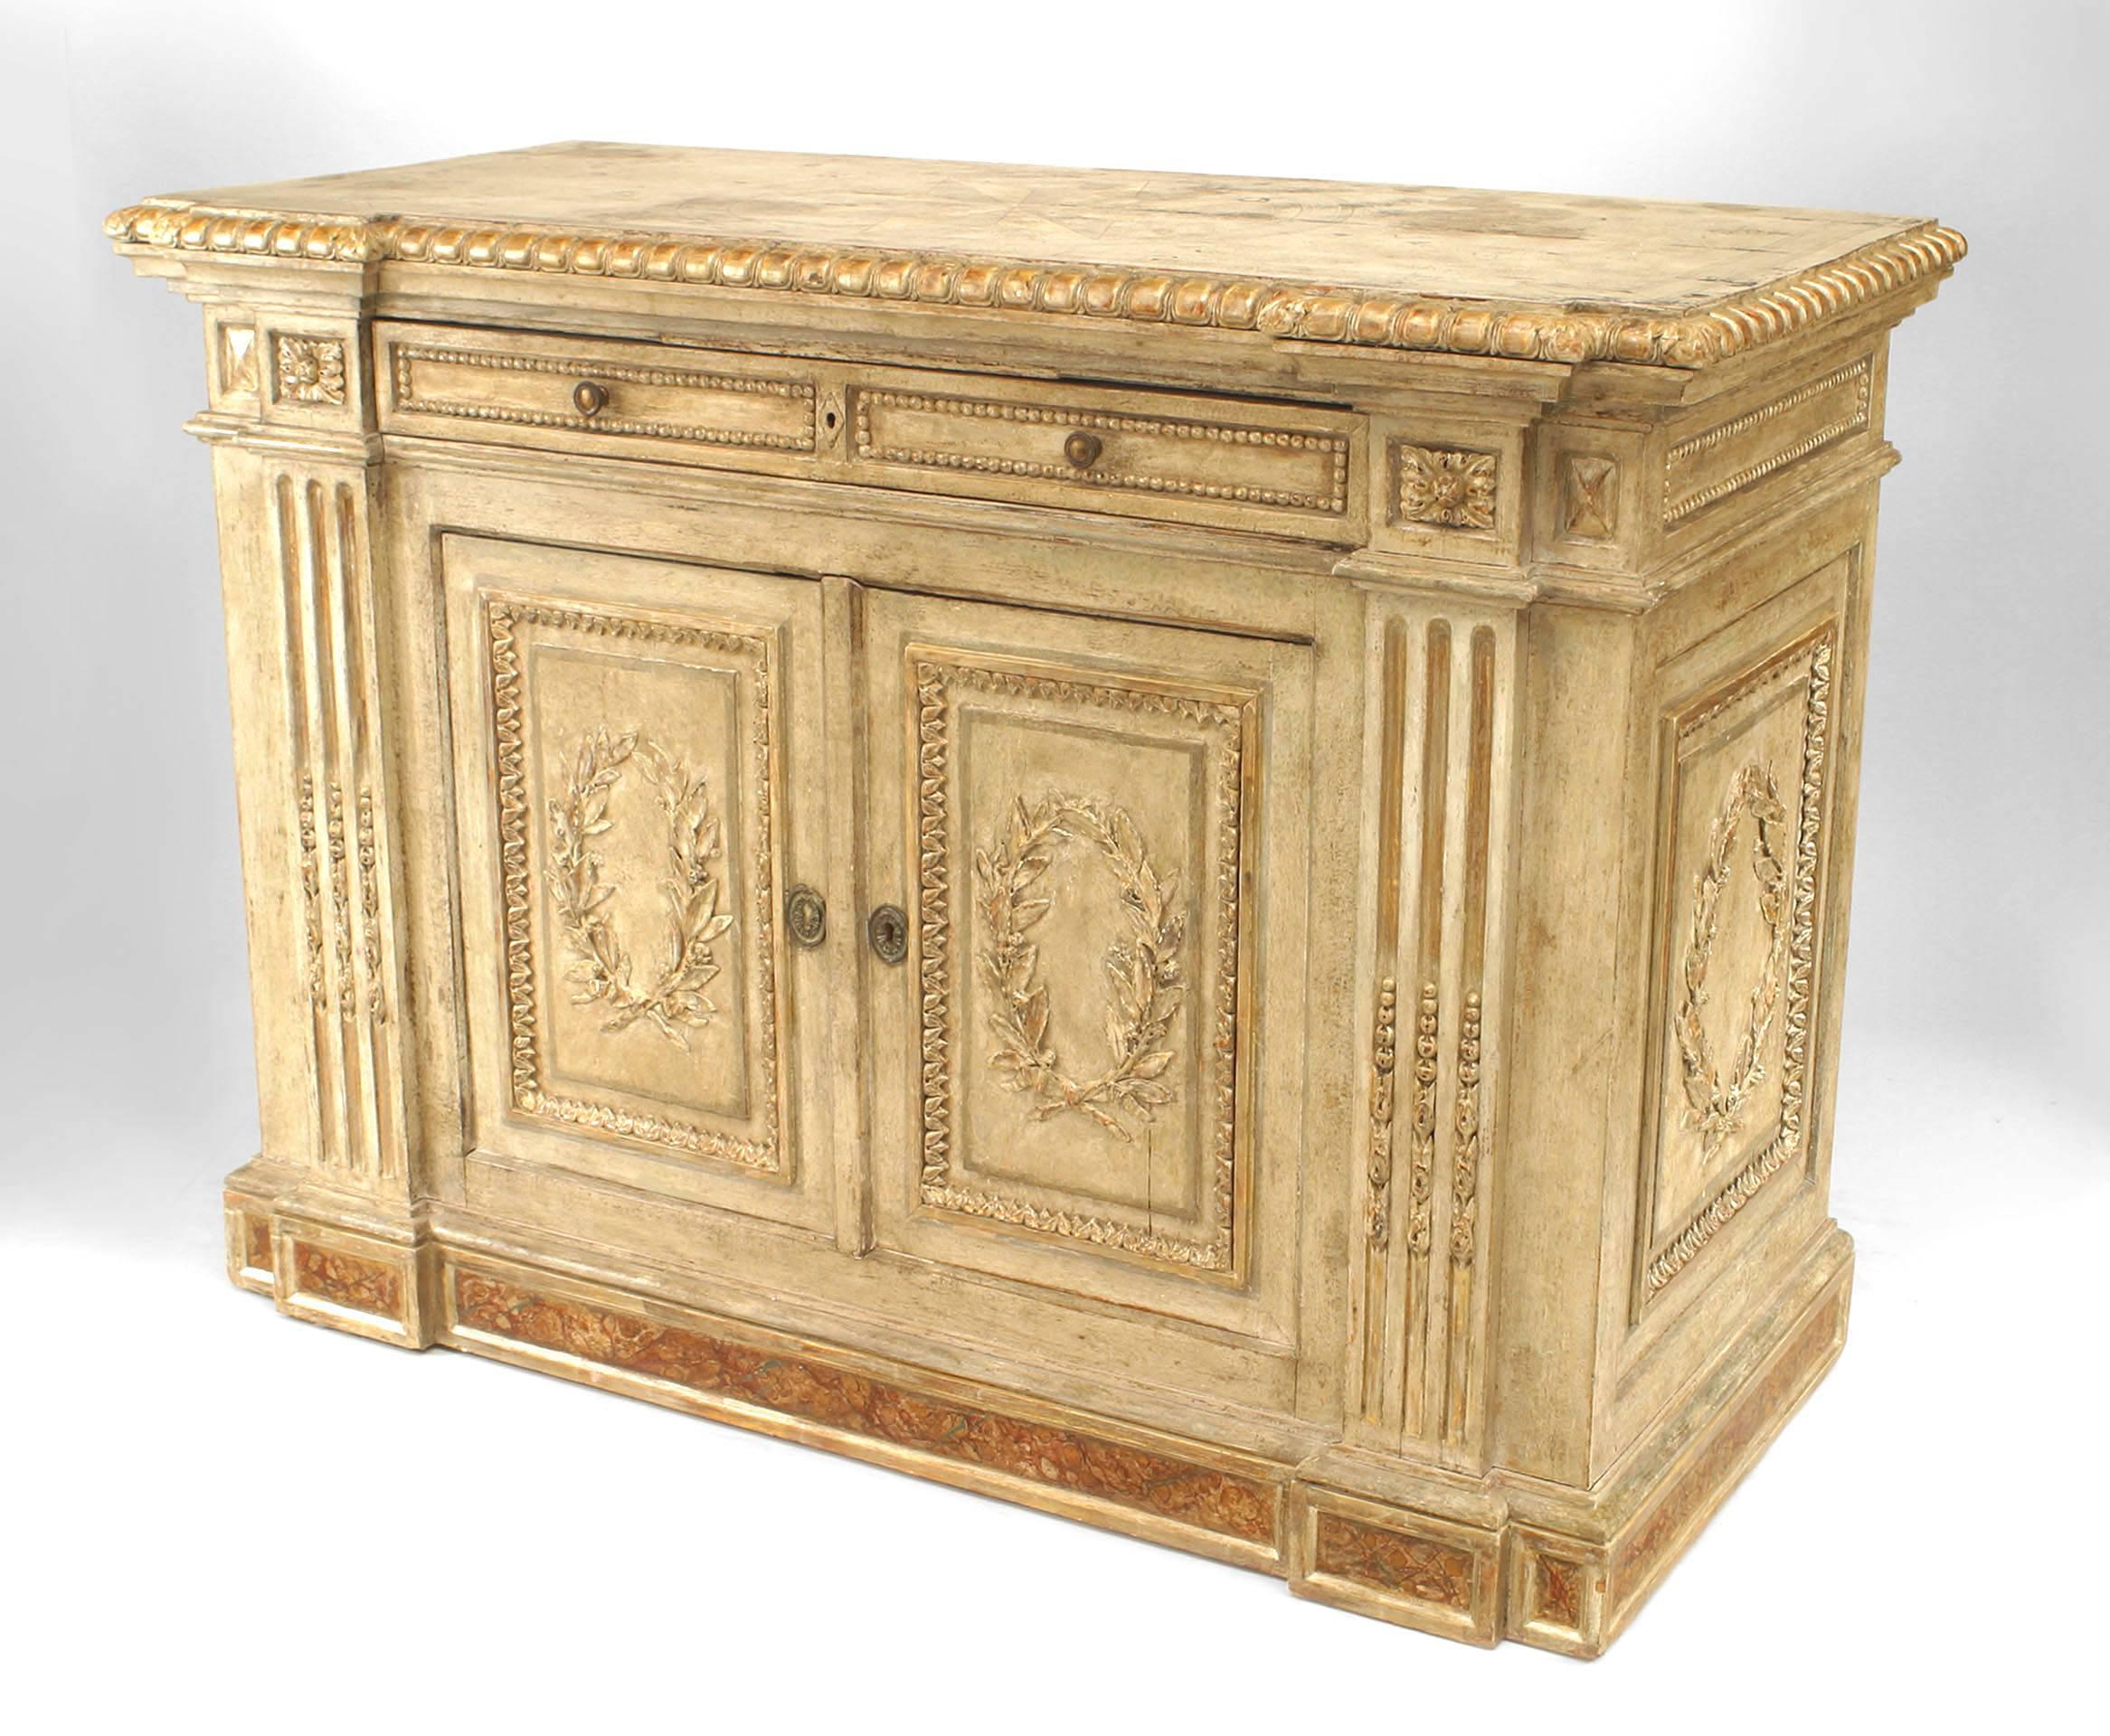 Italian Rococo chest of drawers coated in grey paint and accented with silver gilt trim and decorative carvings, namely classicizing laurel wreath and fluted column motifs. The piece is also raised upon a faux marbelized base and contains two